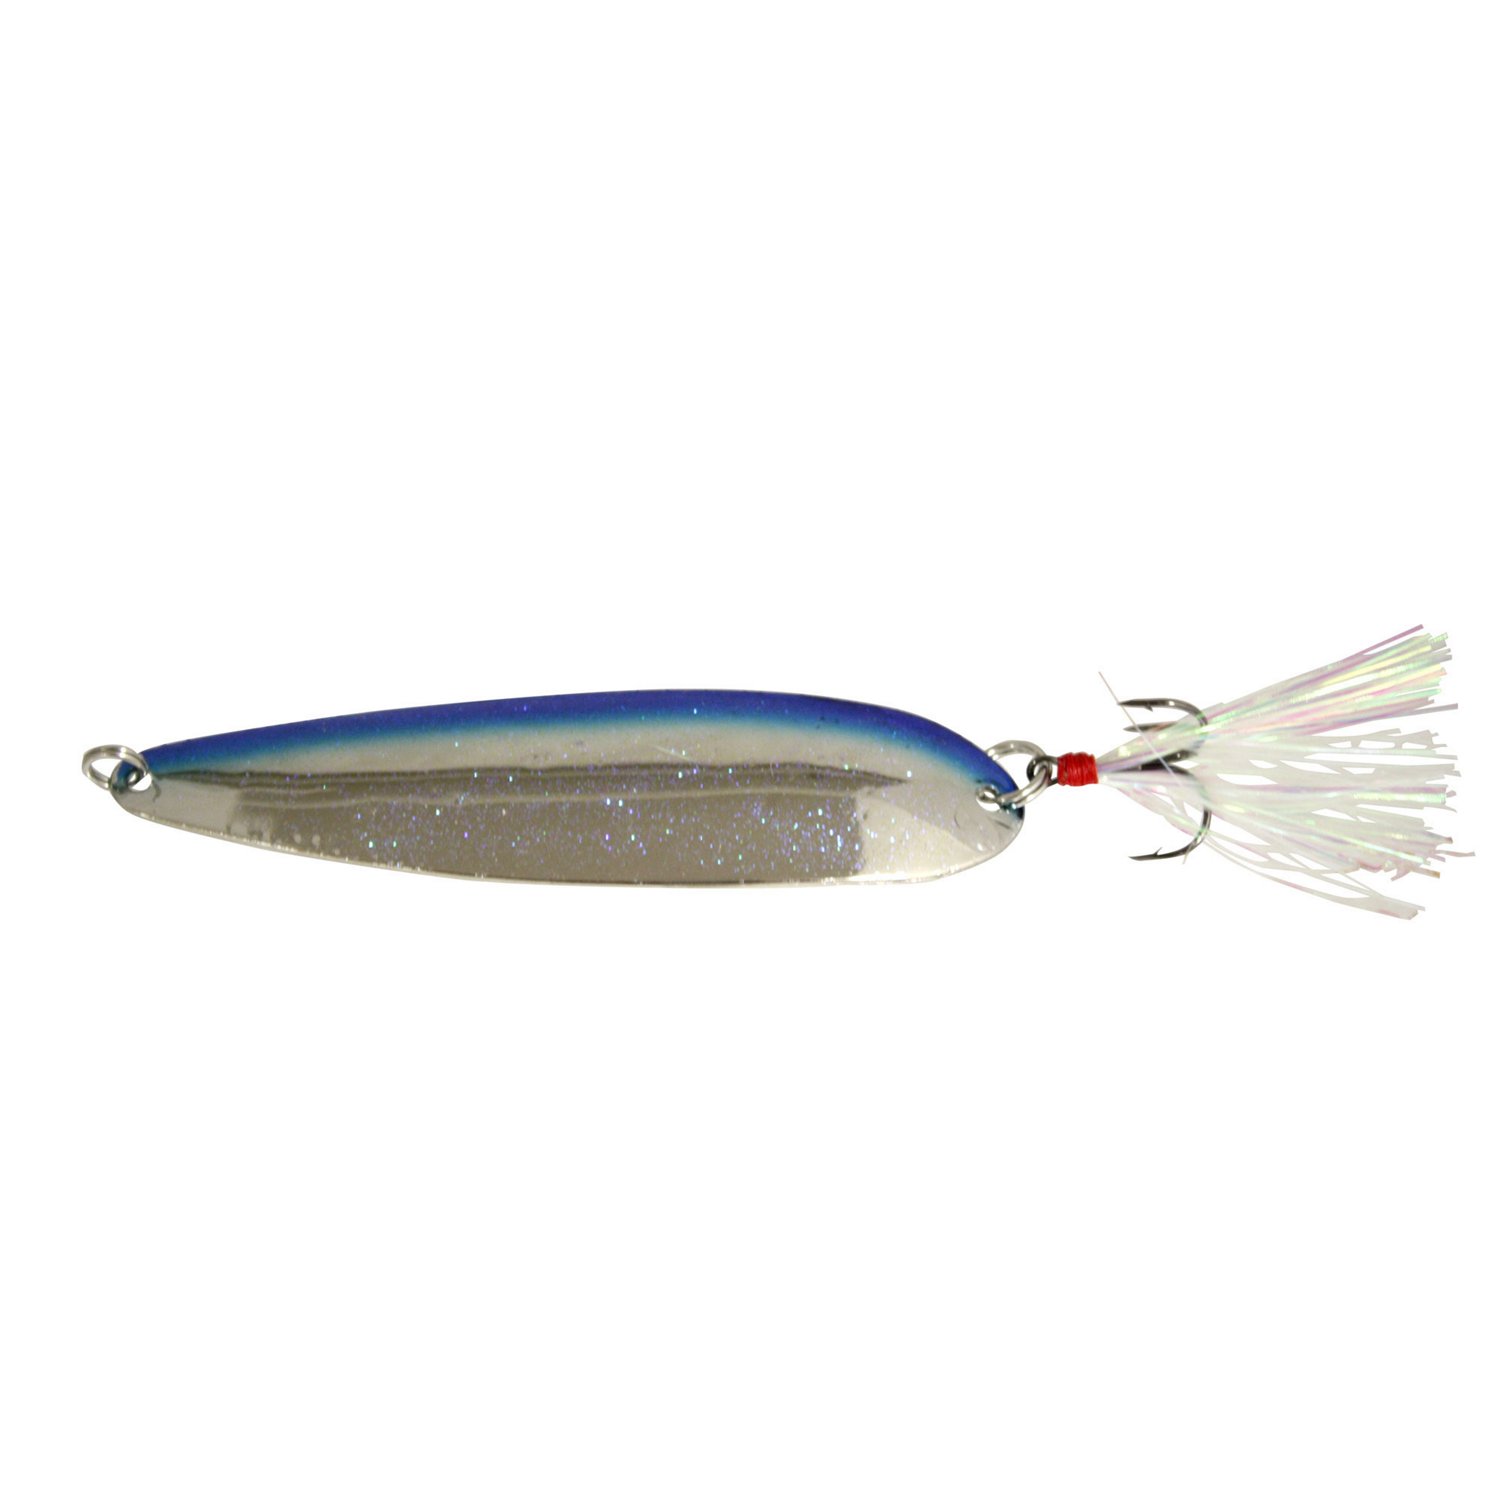 Academy Sports + Outdoors Nichols Lures 4 Flutter Spoon